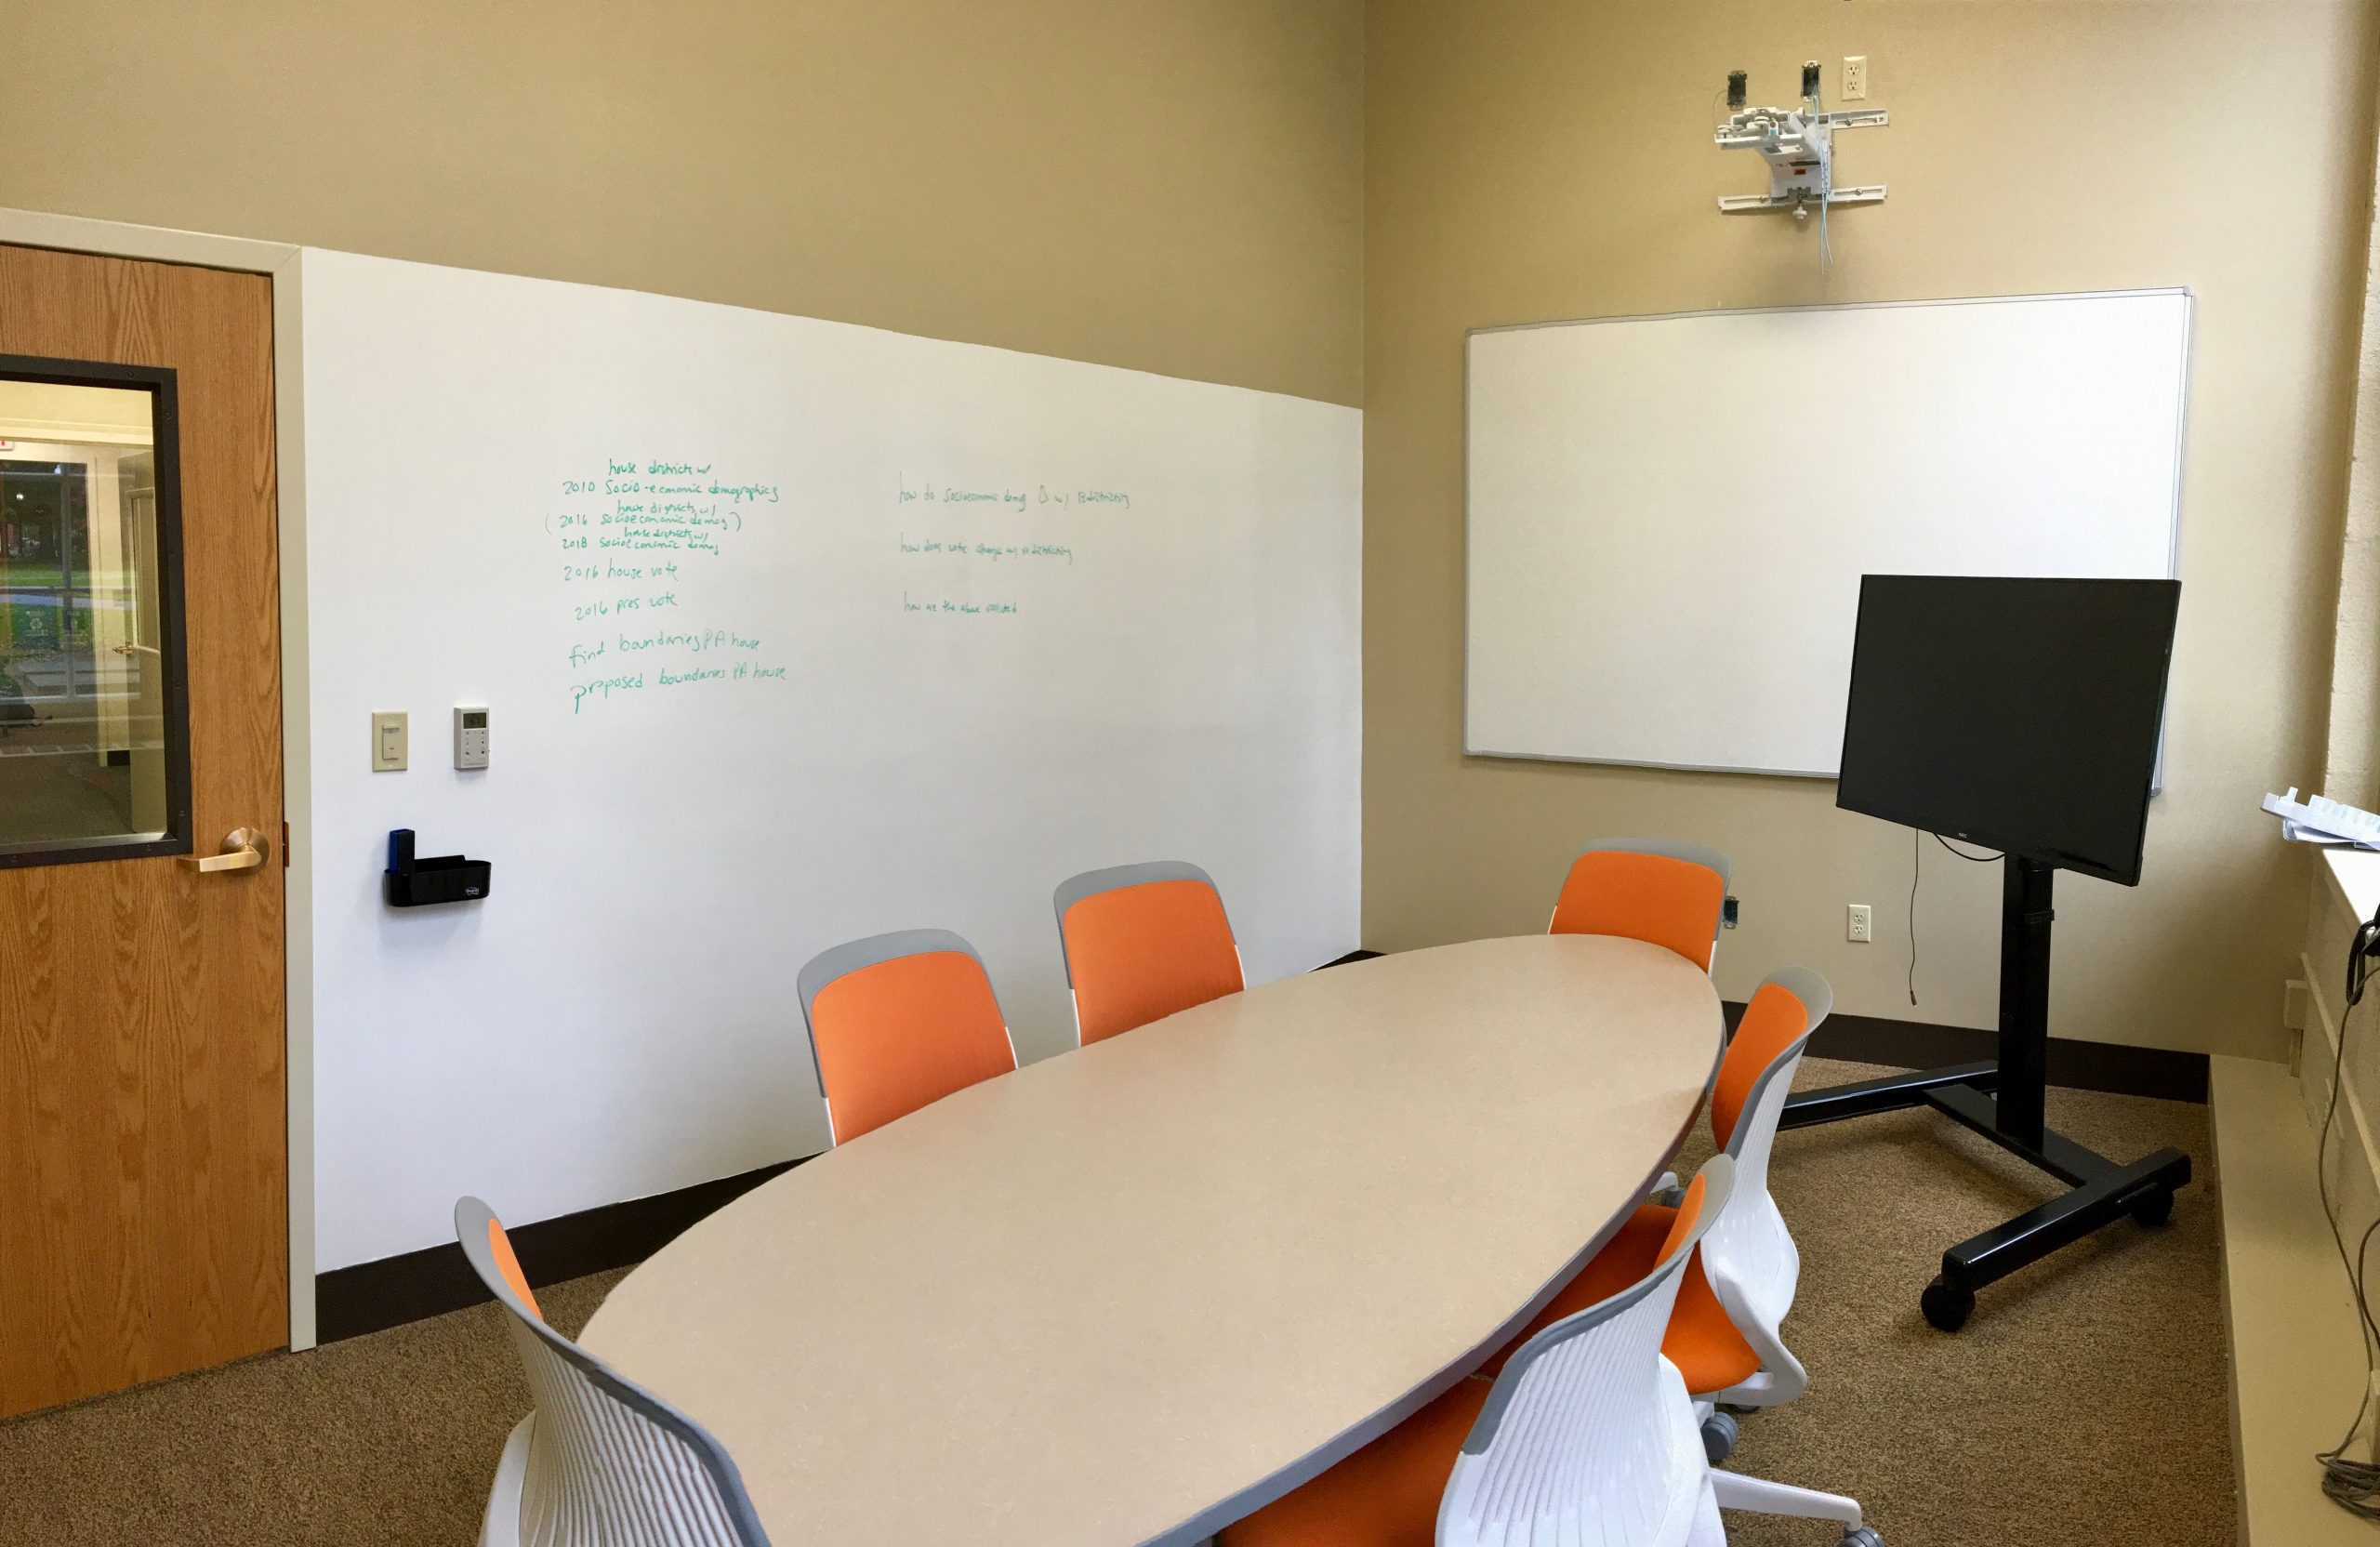 A study room with a long table, six chairs, white boards, and a portable screen